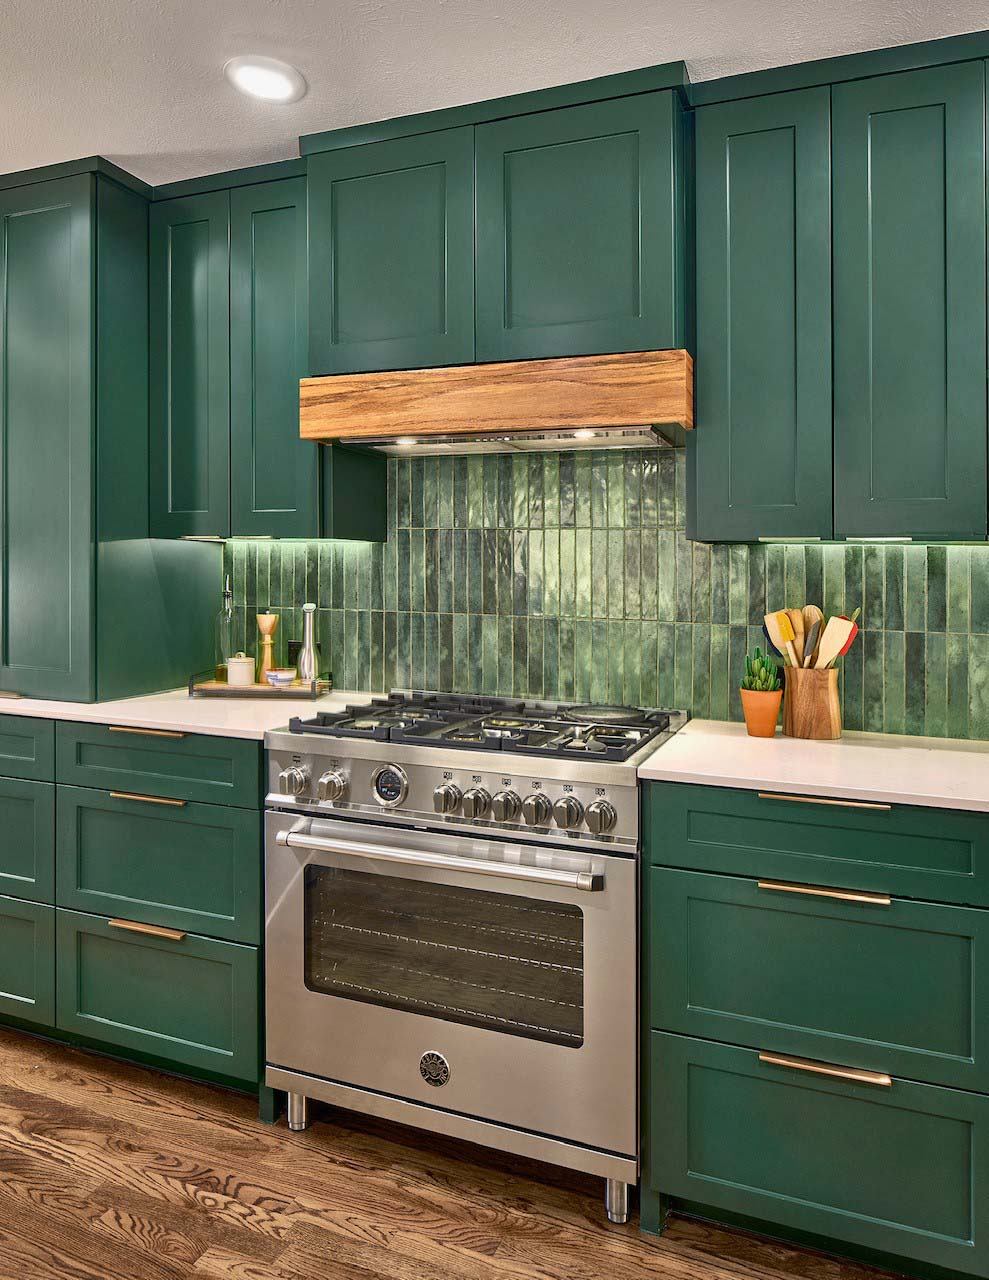 Modern green kitchen remodel in Dallas, Texas with brass cabinet fixtures and green vertical subway tile backsplash